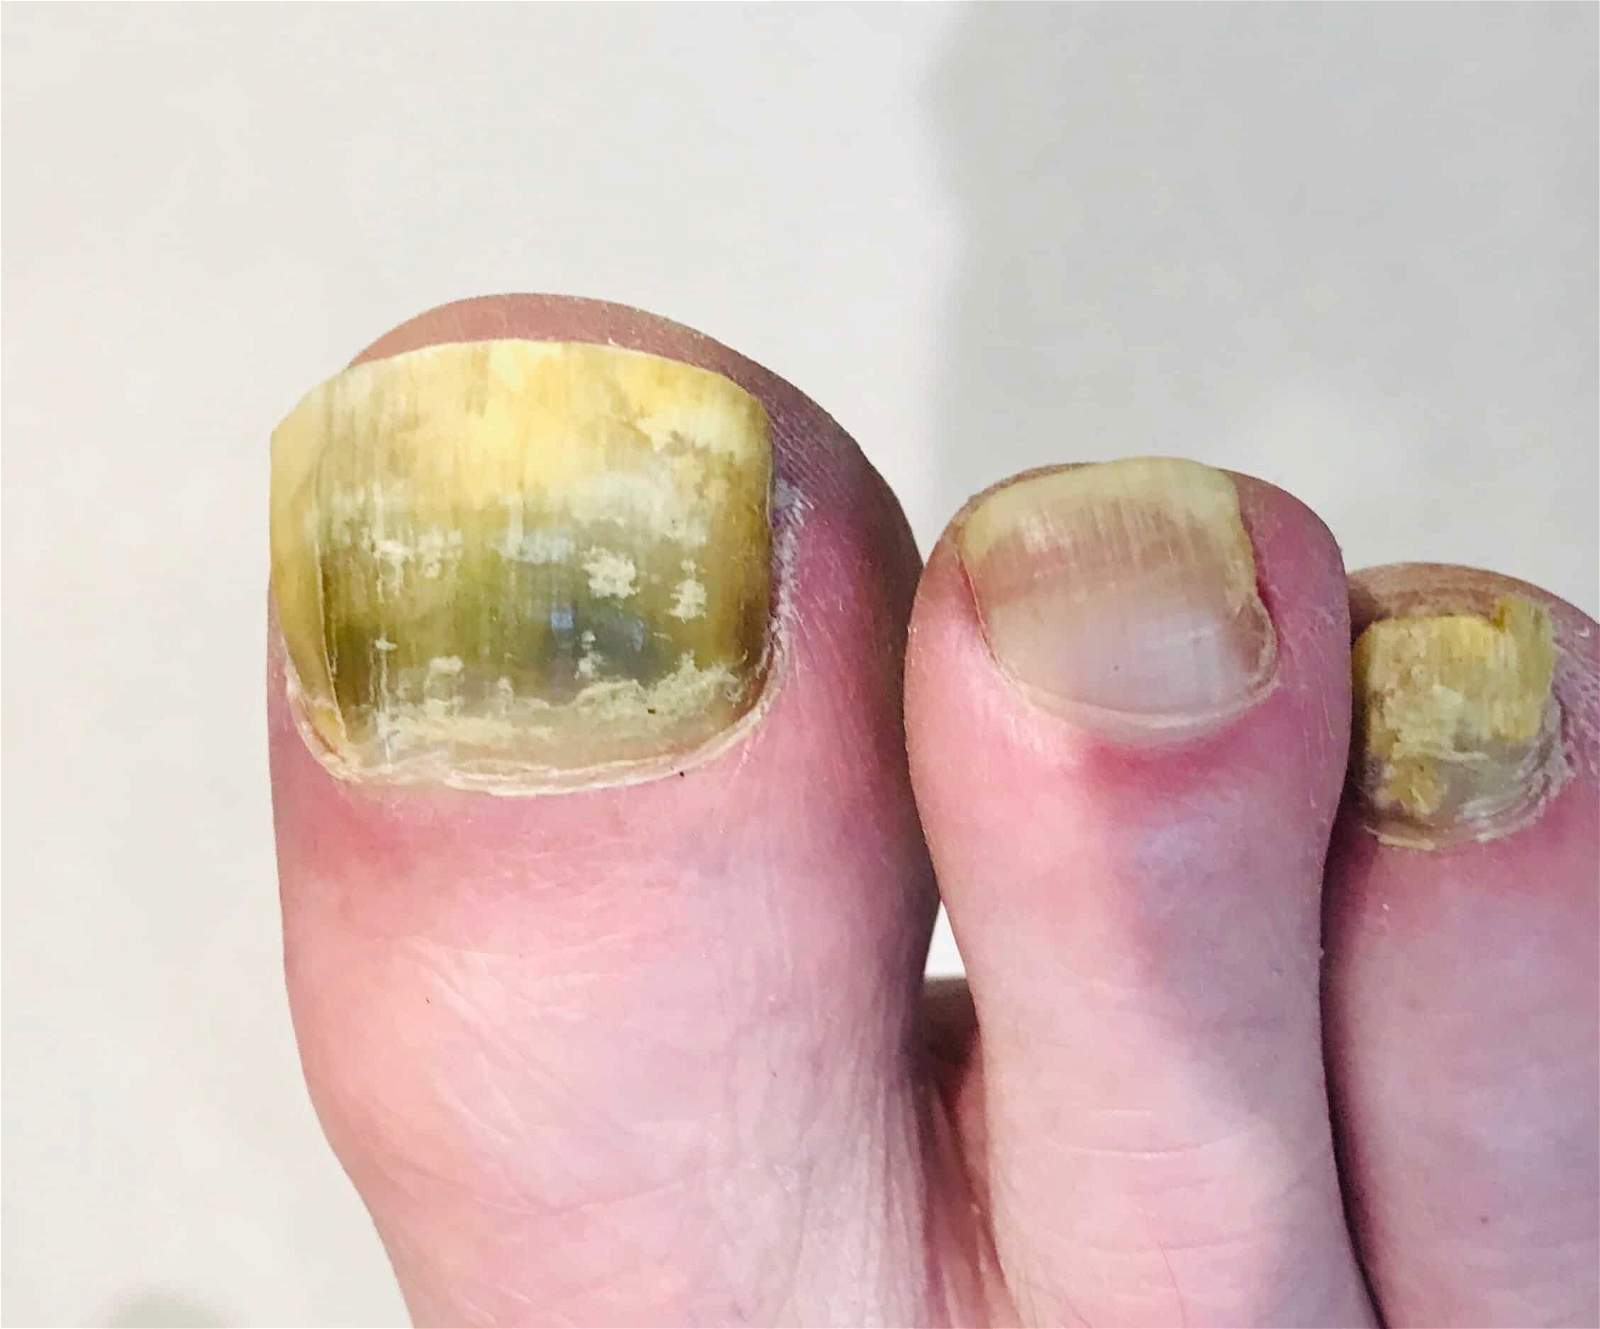 8. Big Toe Nail Color Change and Fungal Infections - wide 8